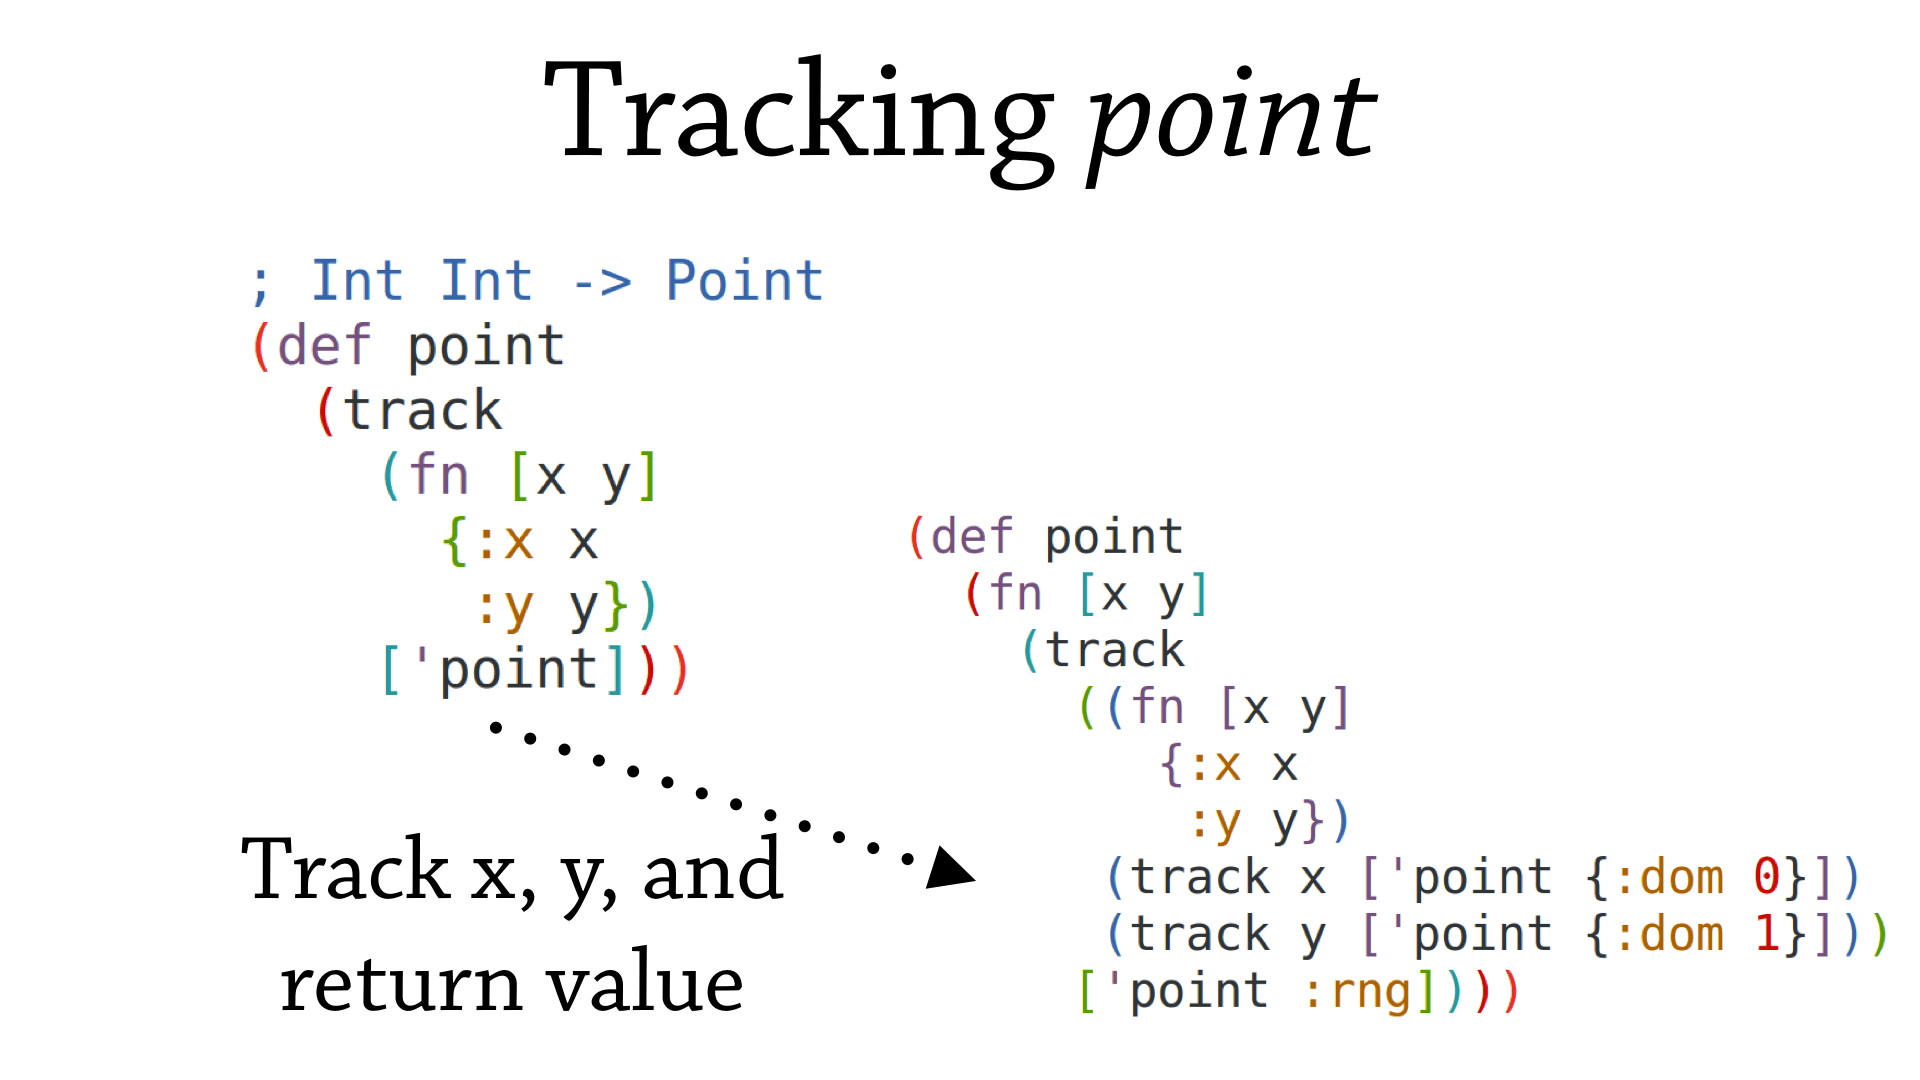 Further tracking of function